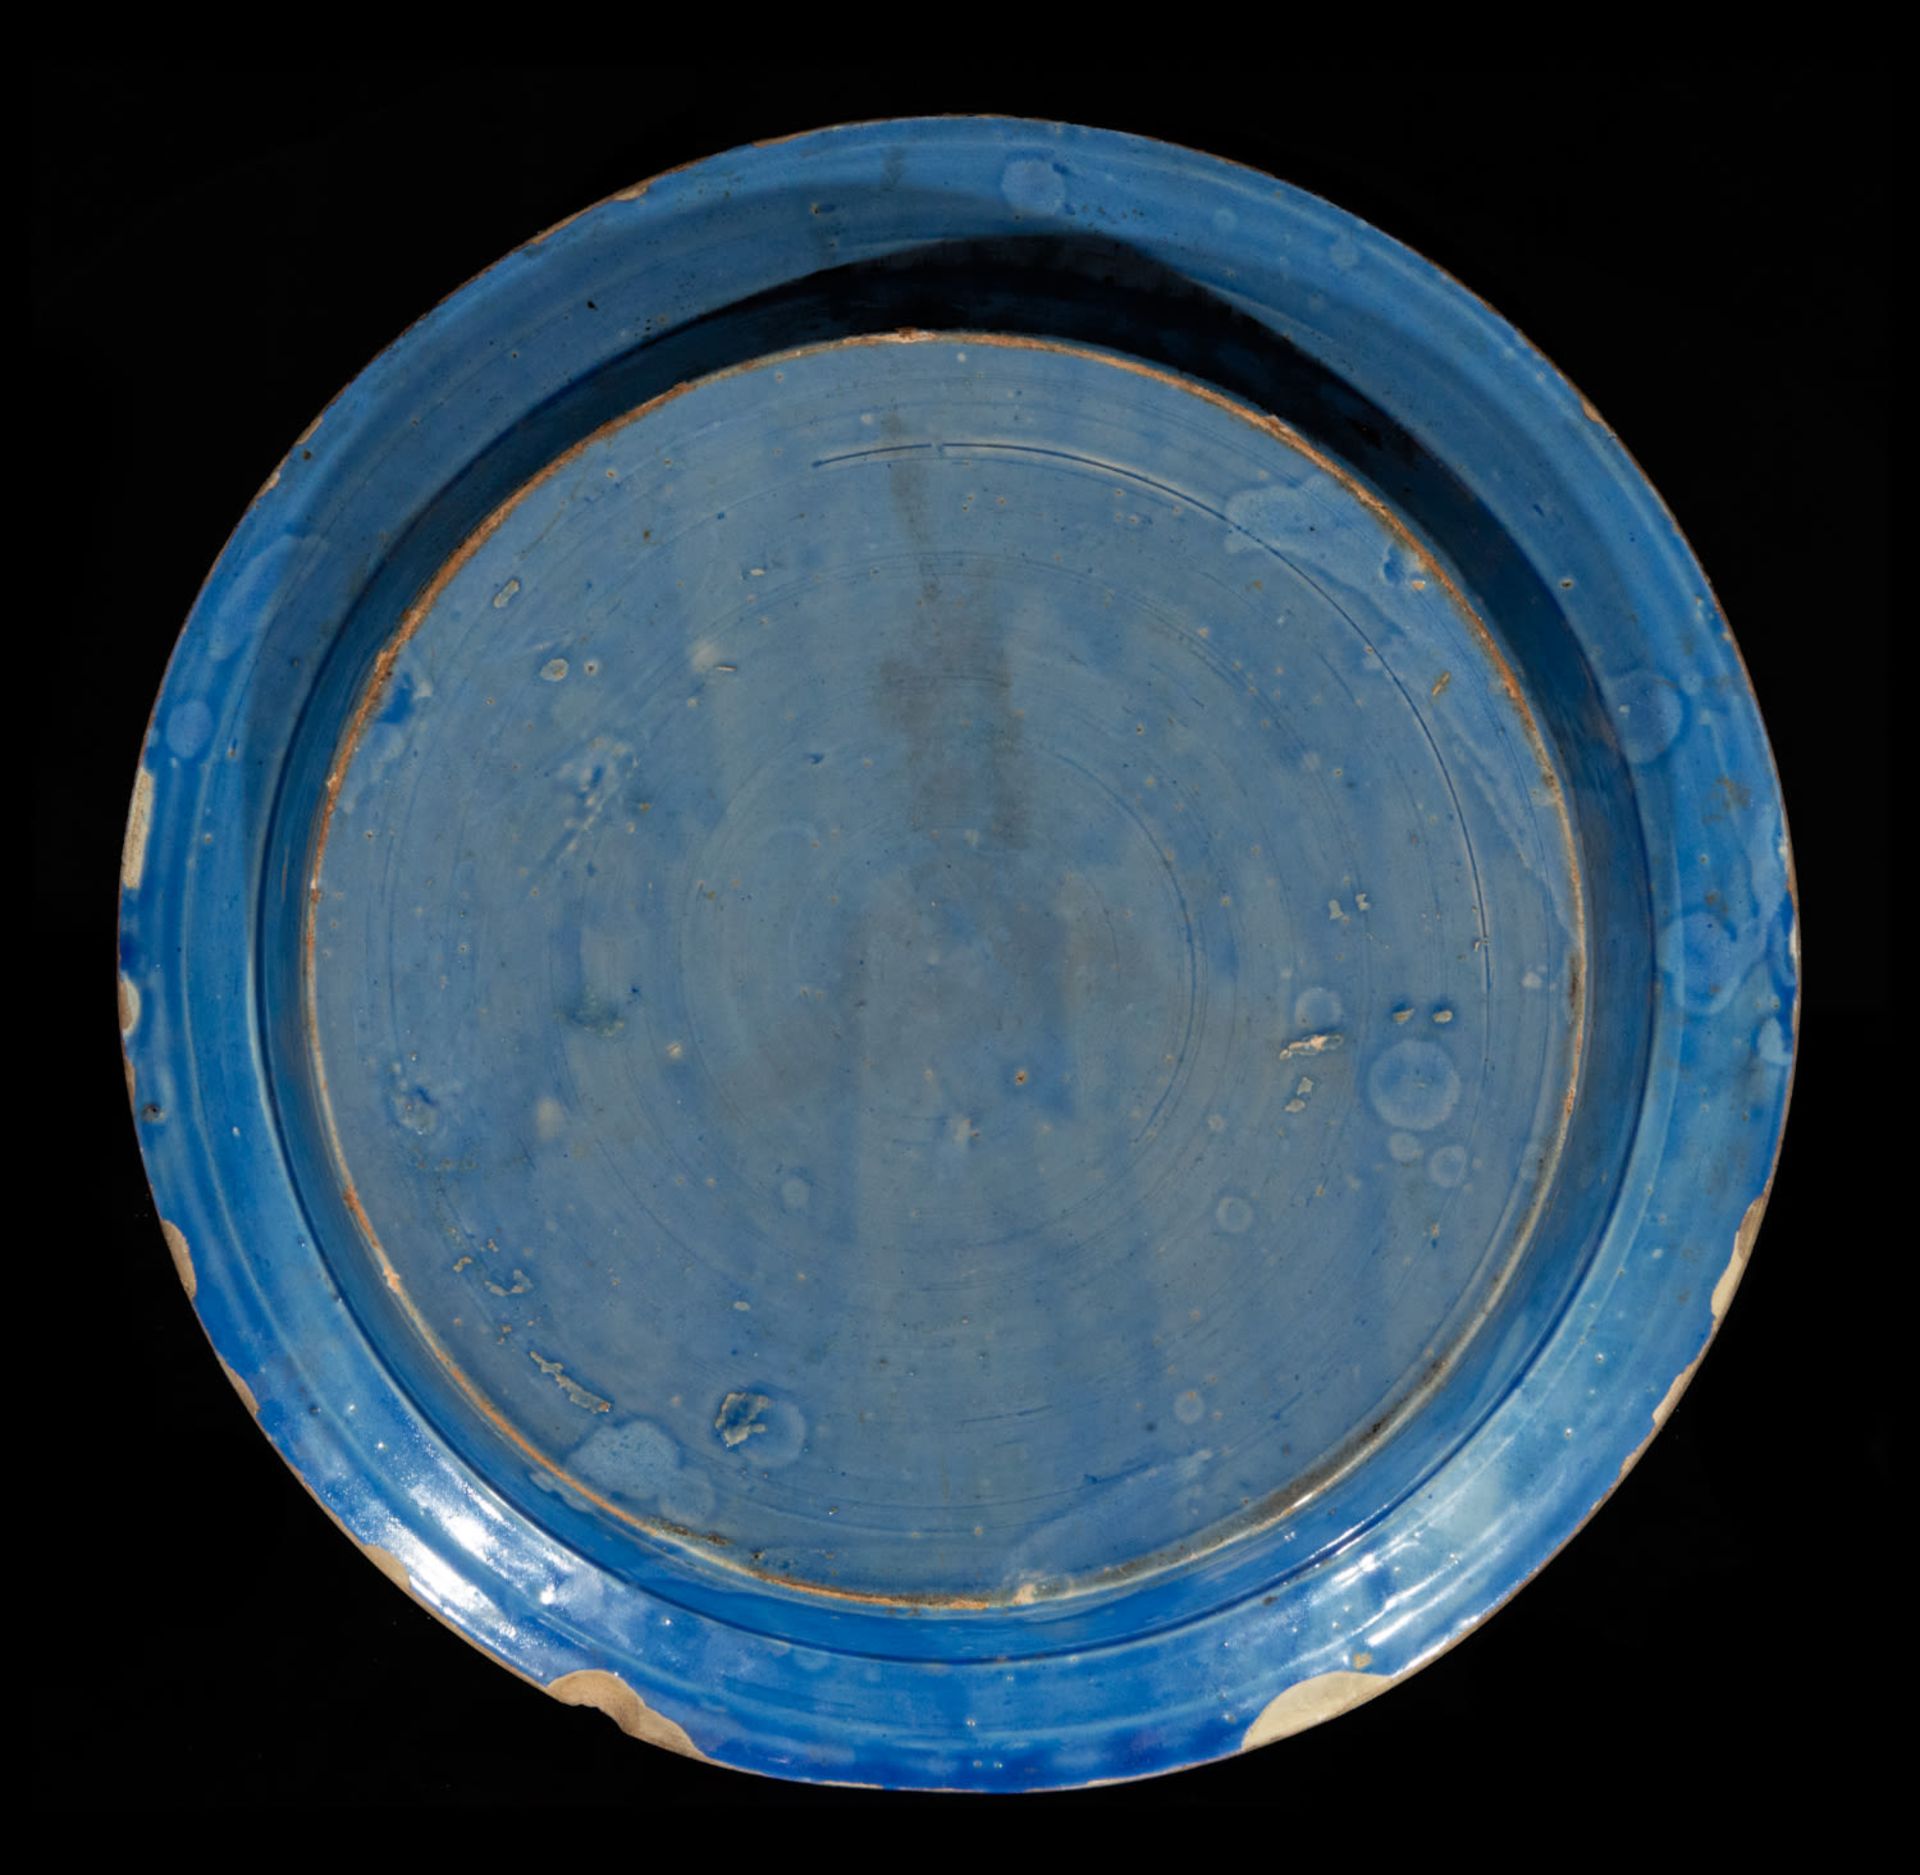 Spectacular Large Plate in enameled blue from Manises with Lion rampant from the 16th century - Bild 4 aus 4